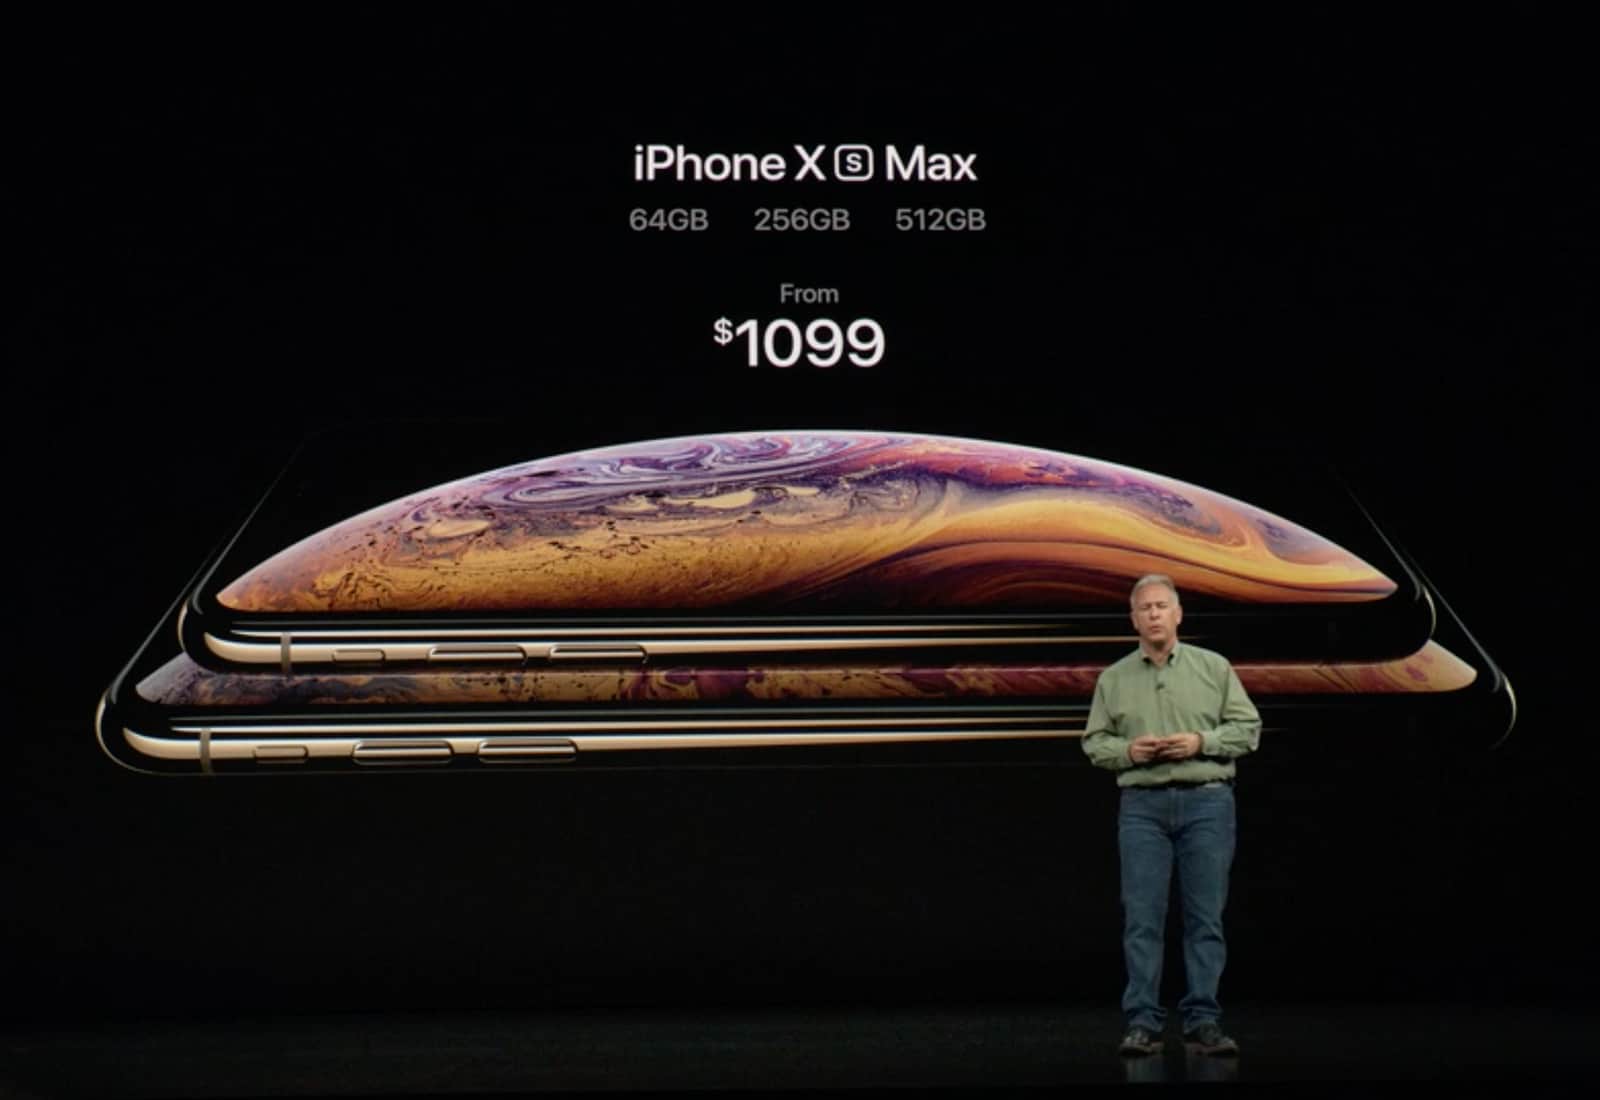 The iPhone XS Max price tag could be a deal-breaker for some